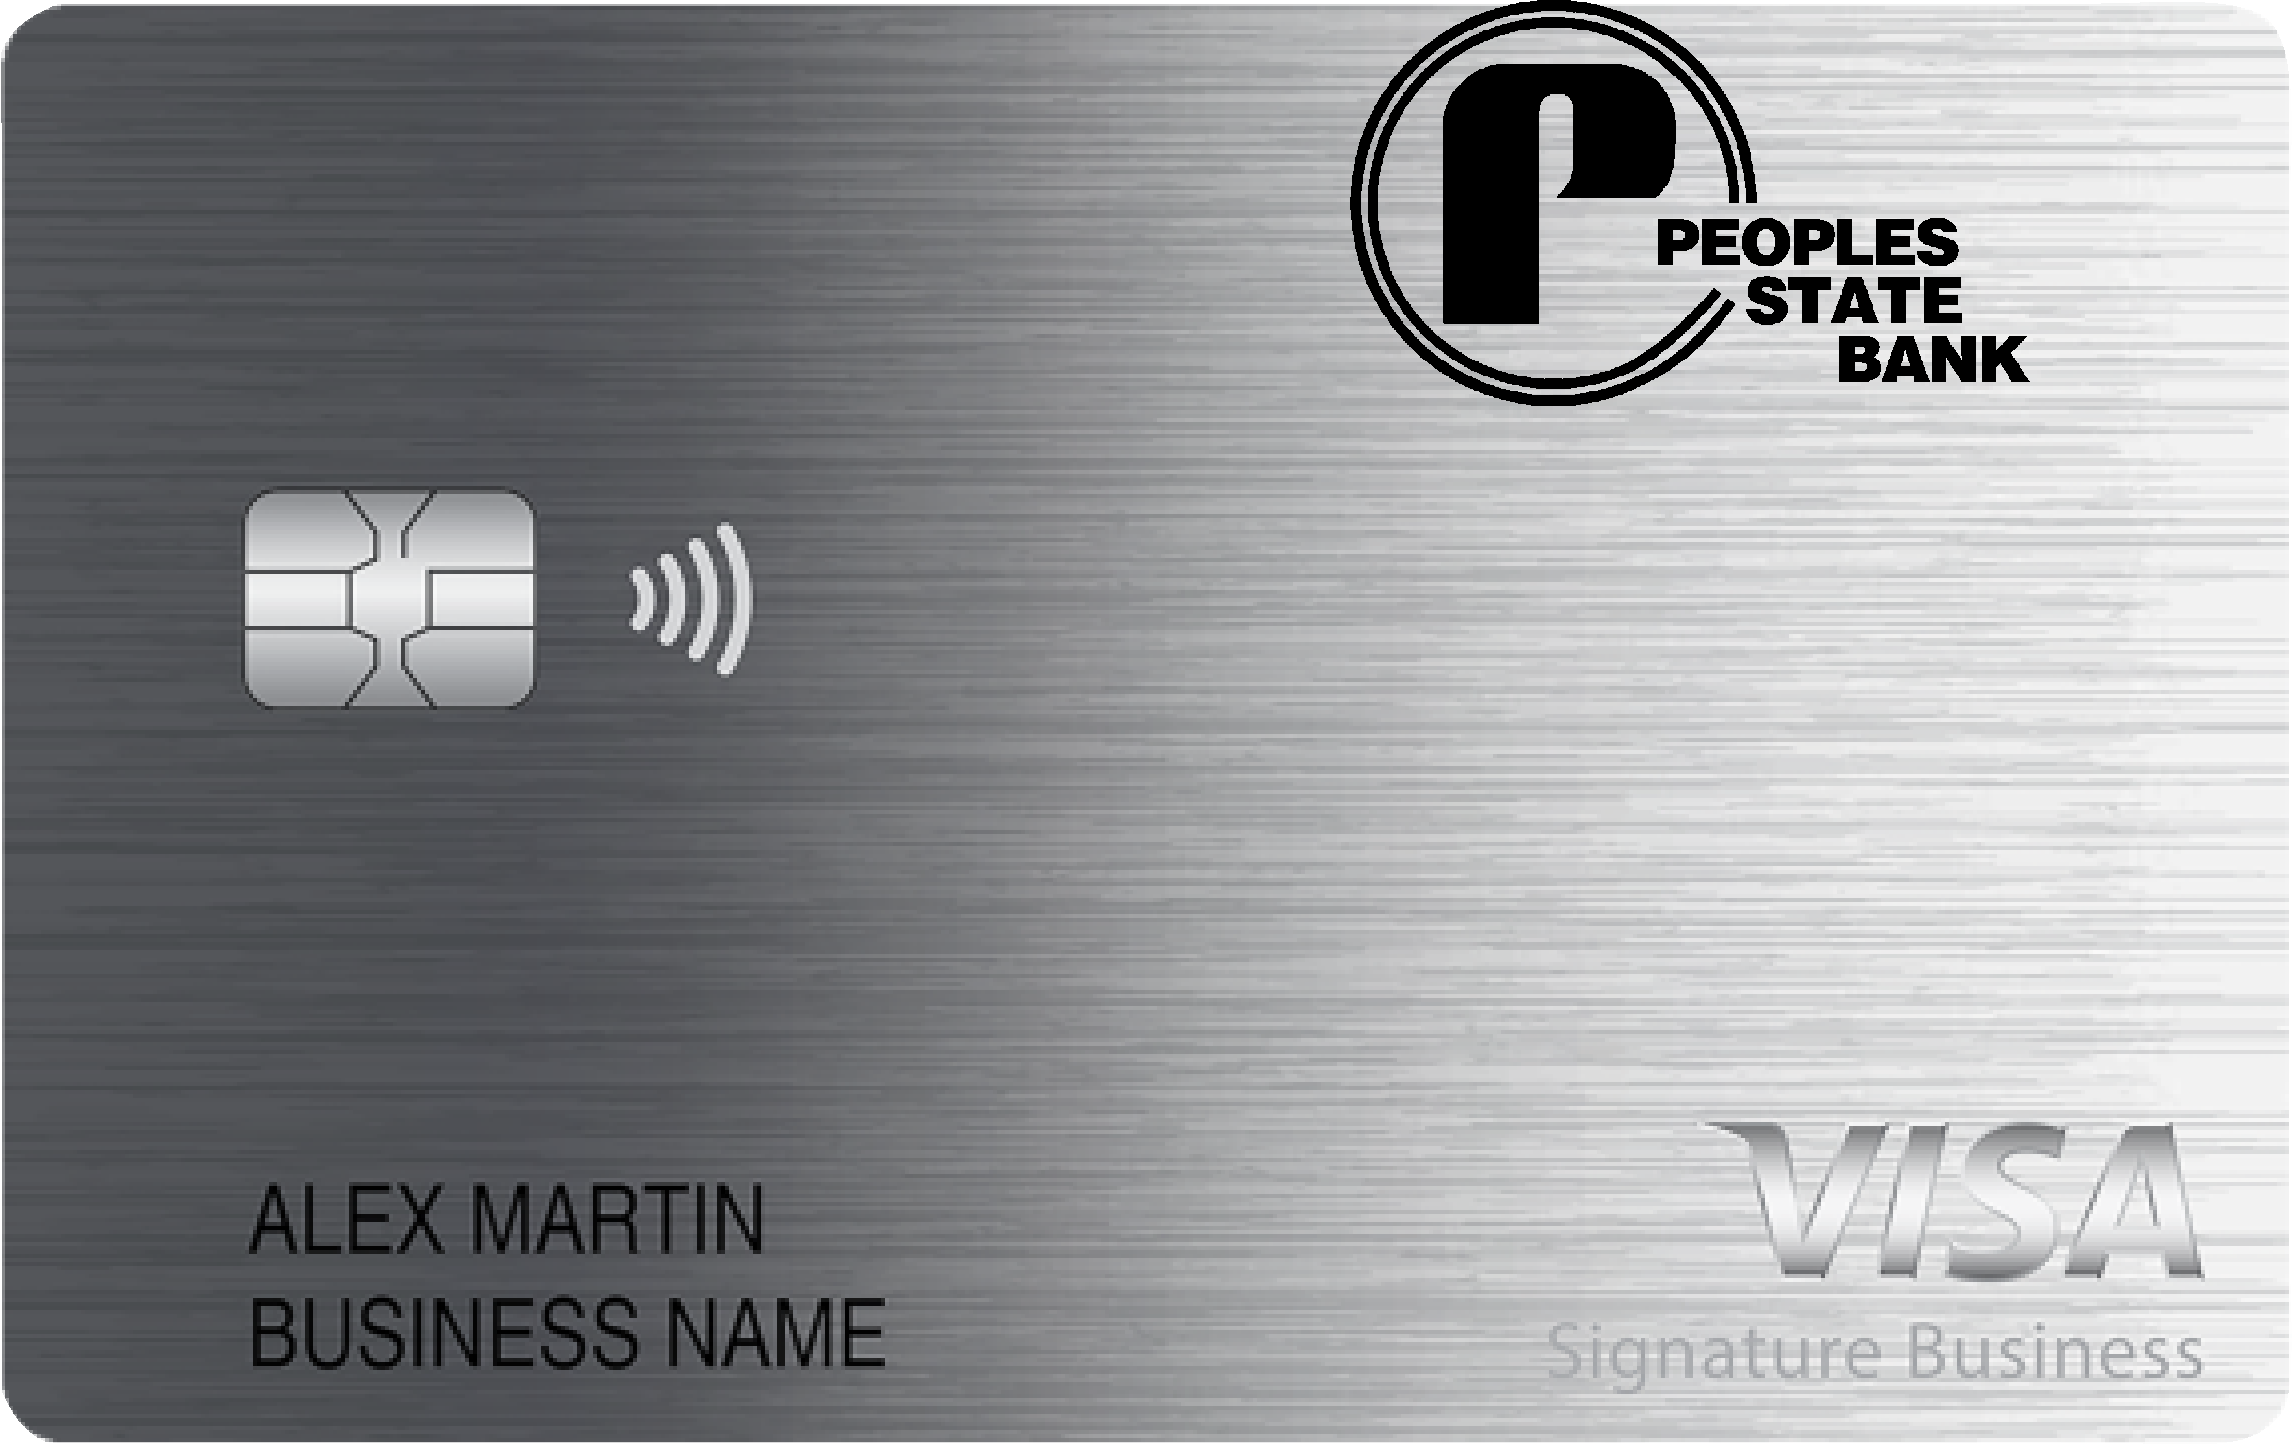 Peoples State Bank Smart Business Rewards Card